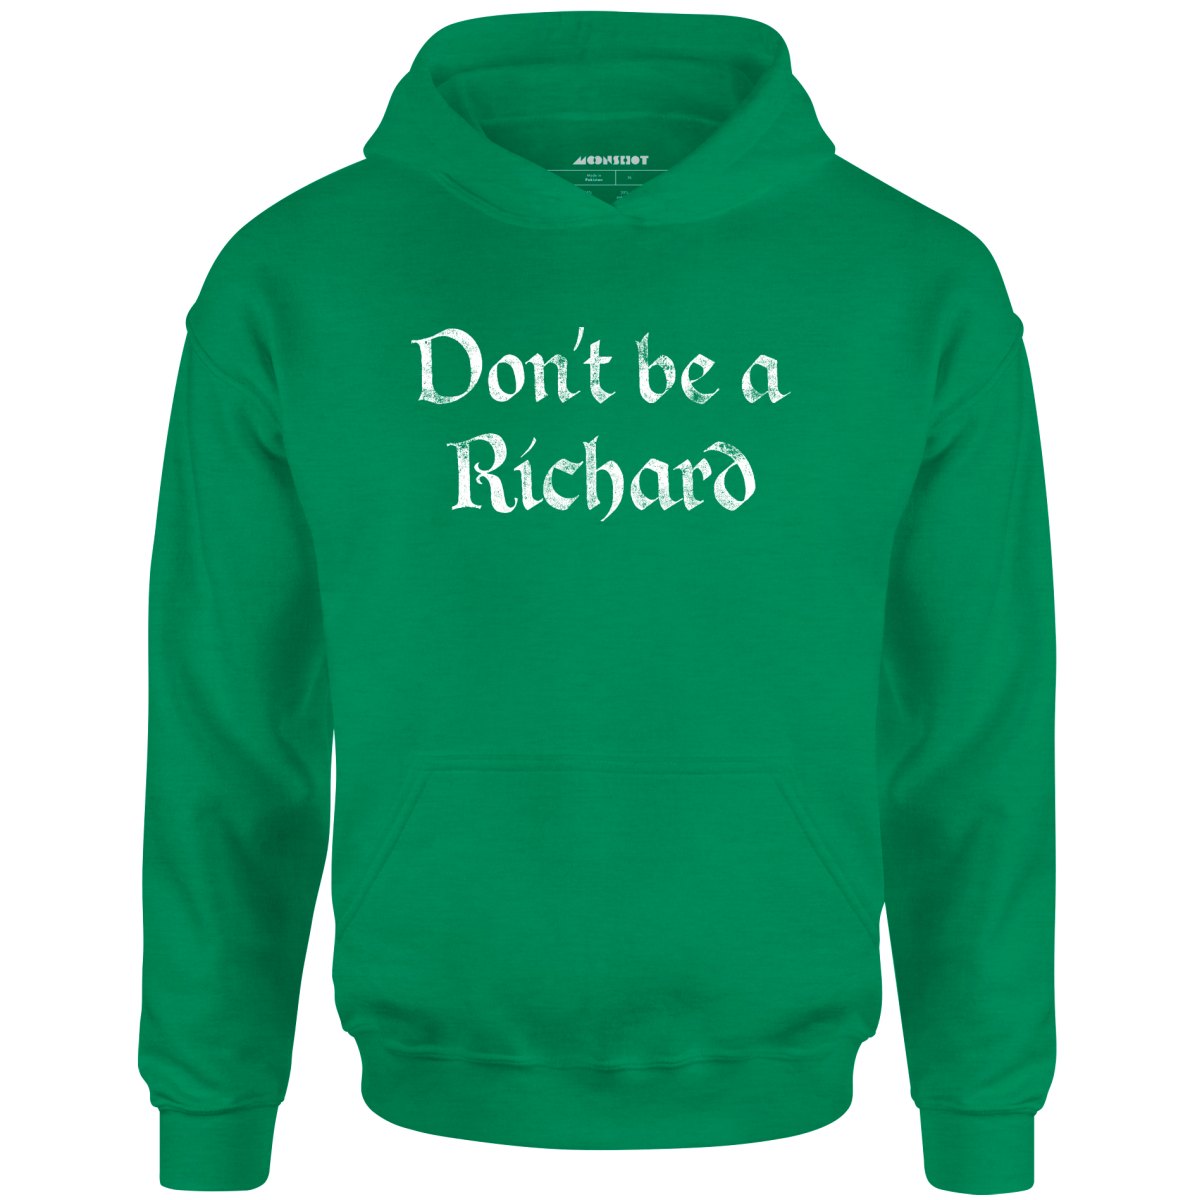 Don't Be a Richard - Unisex Hoodie